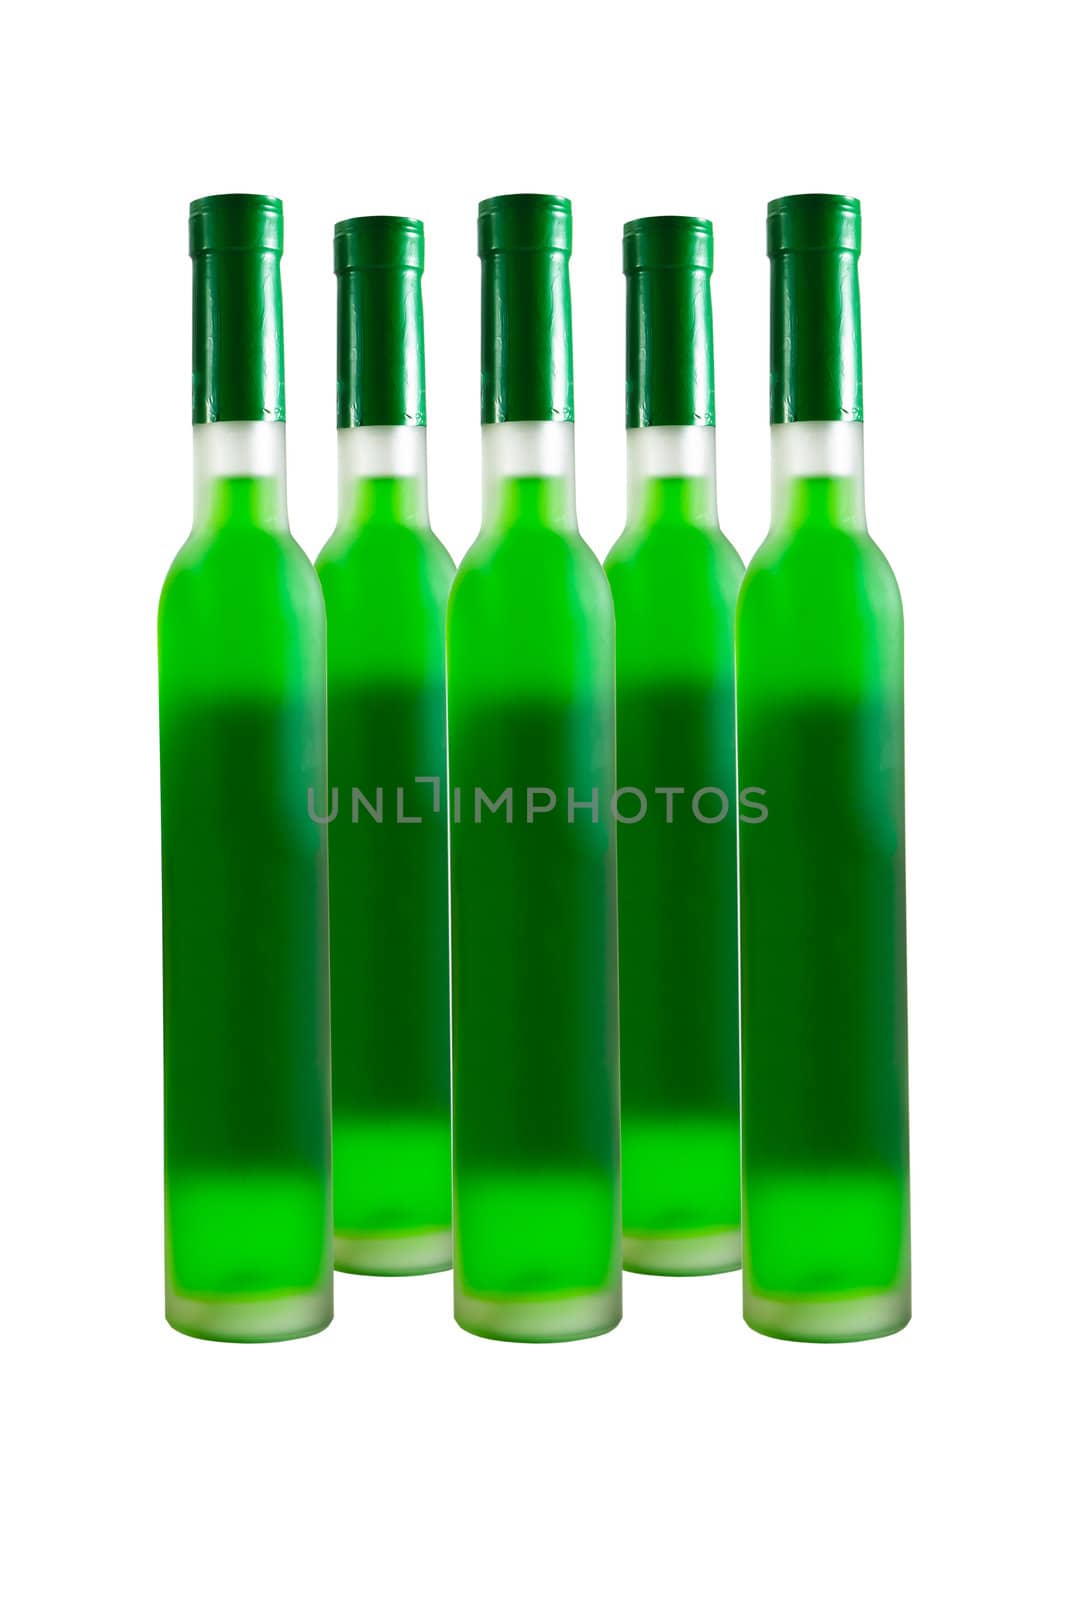 Green wine bottles in row isolated on white.